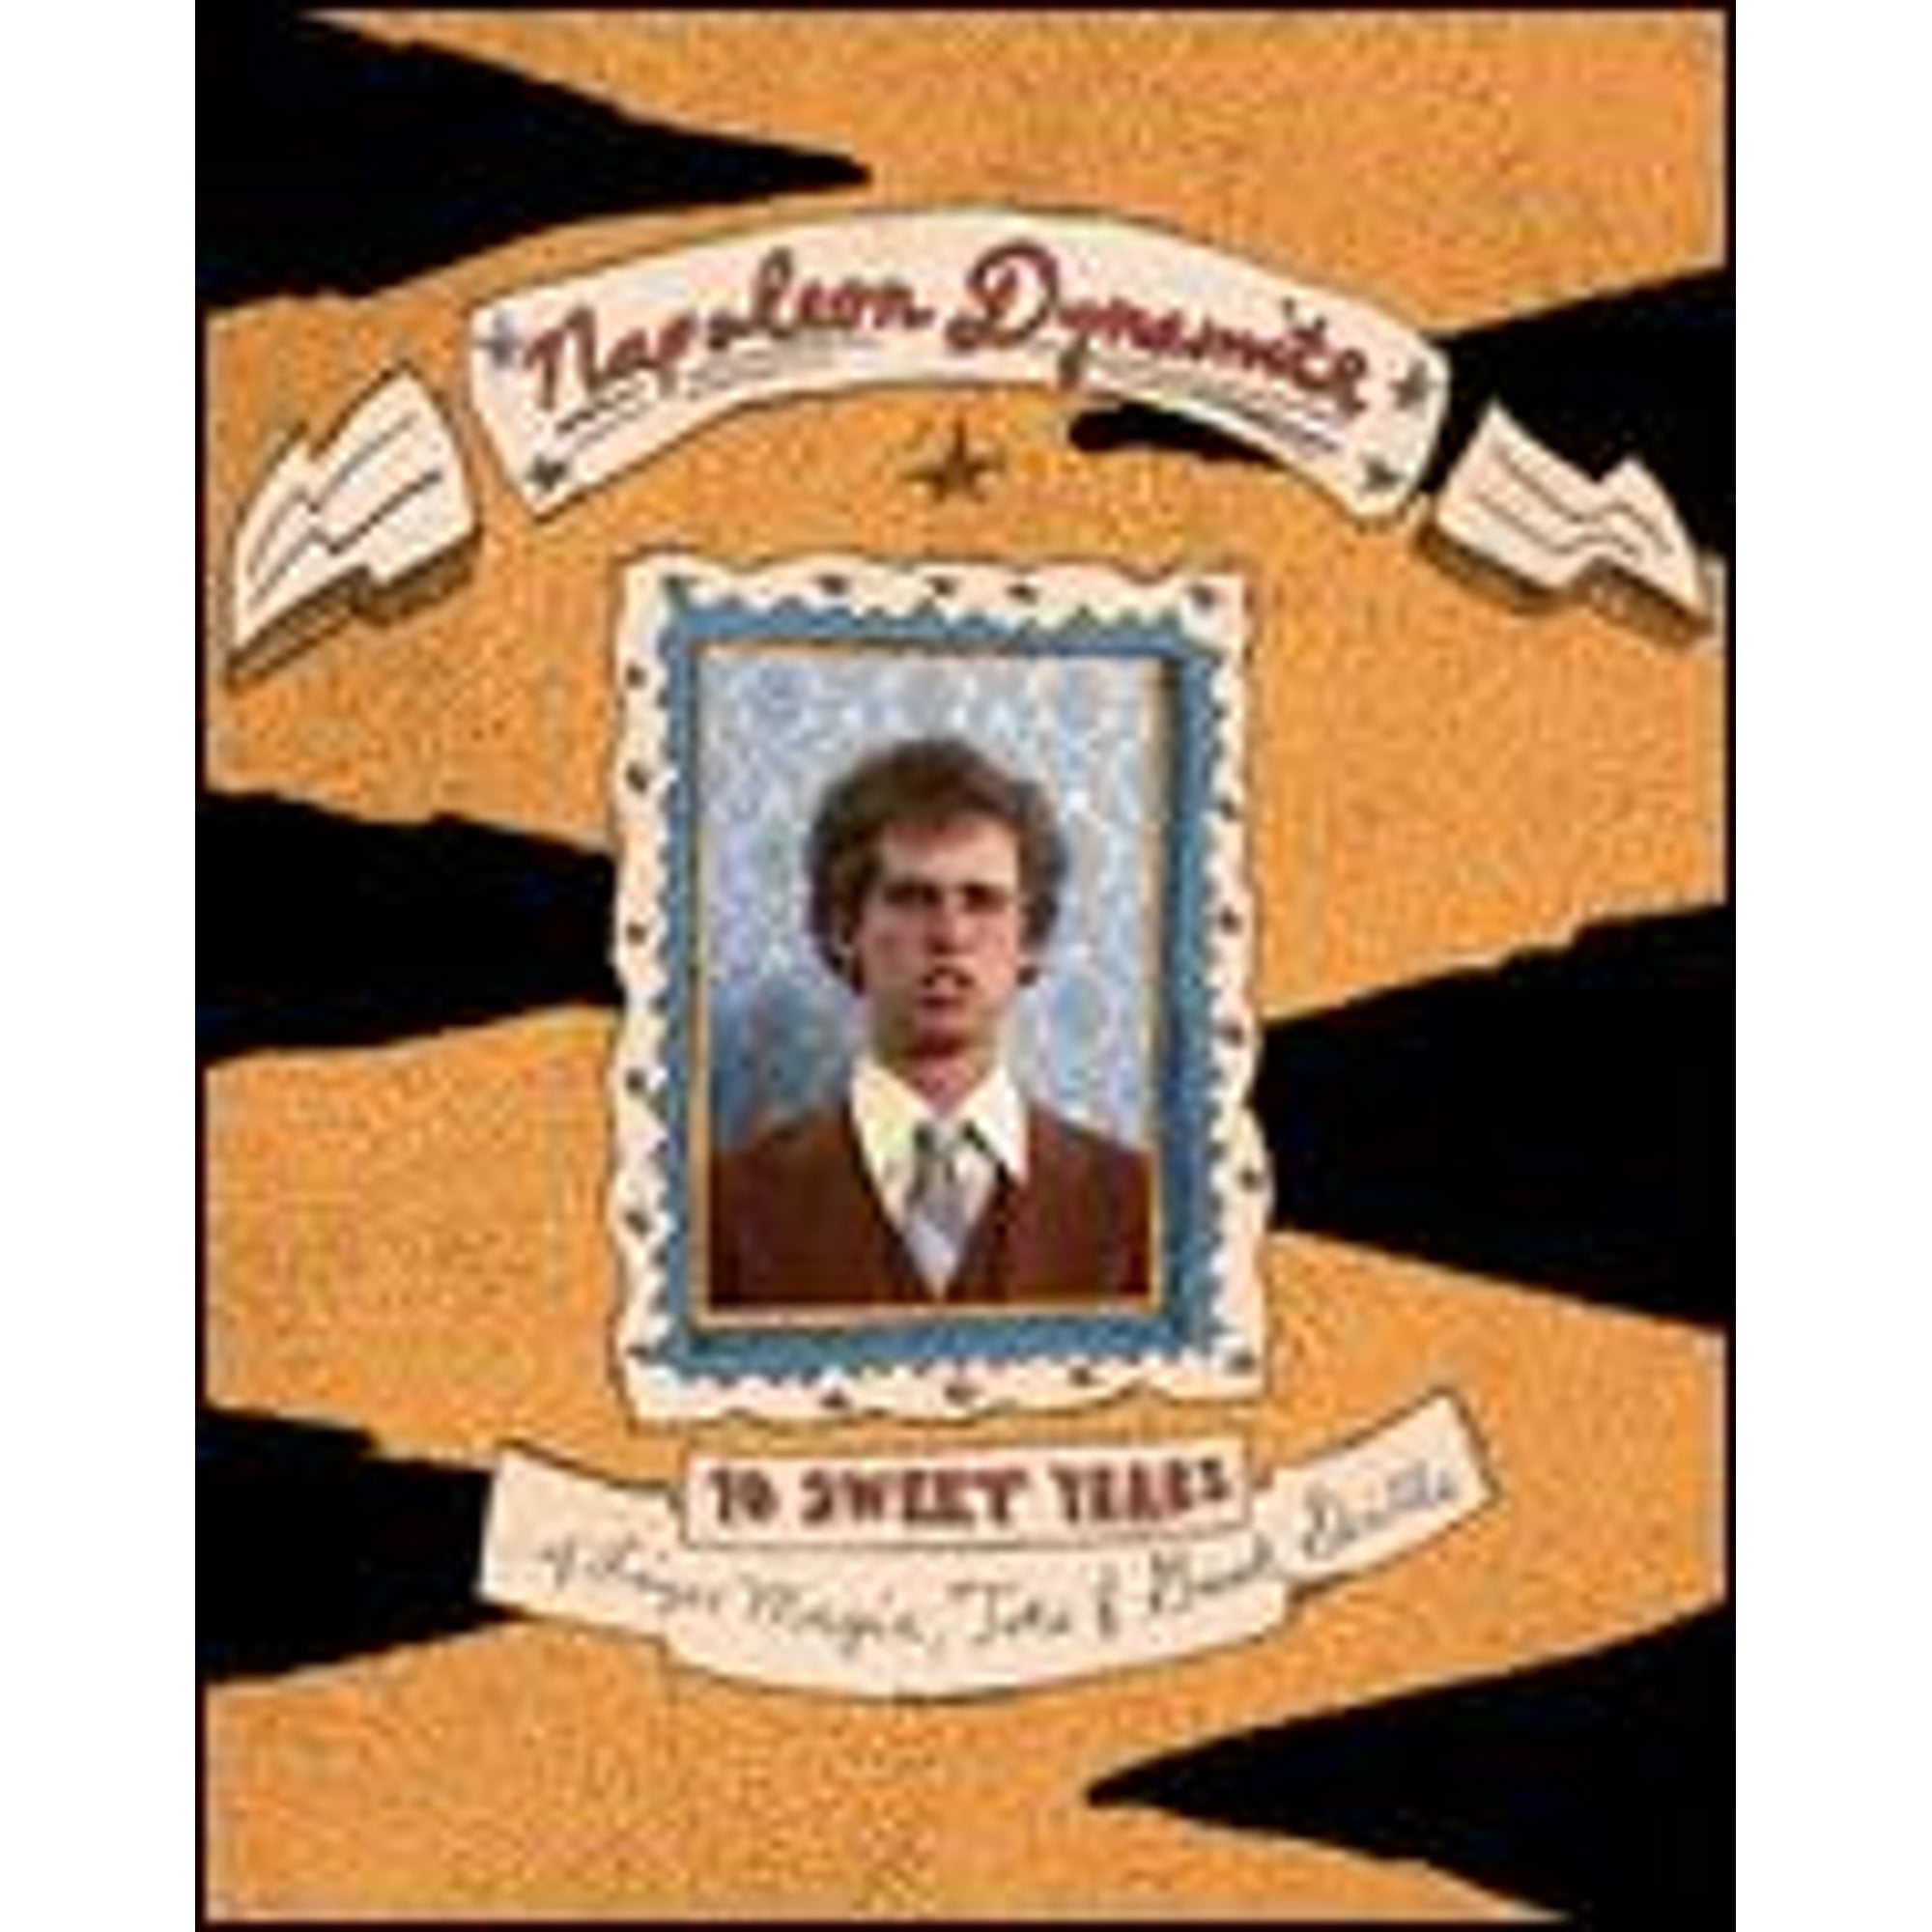 Pre-Owned Napoleon Dynamite [10th Anniversary Edition] [2 Discs] [Blu-ray] ( Blu-Ray 0024543894568) directed by Jared Hess 